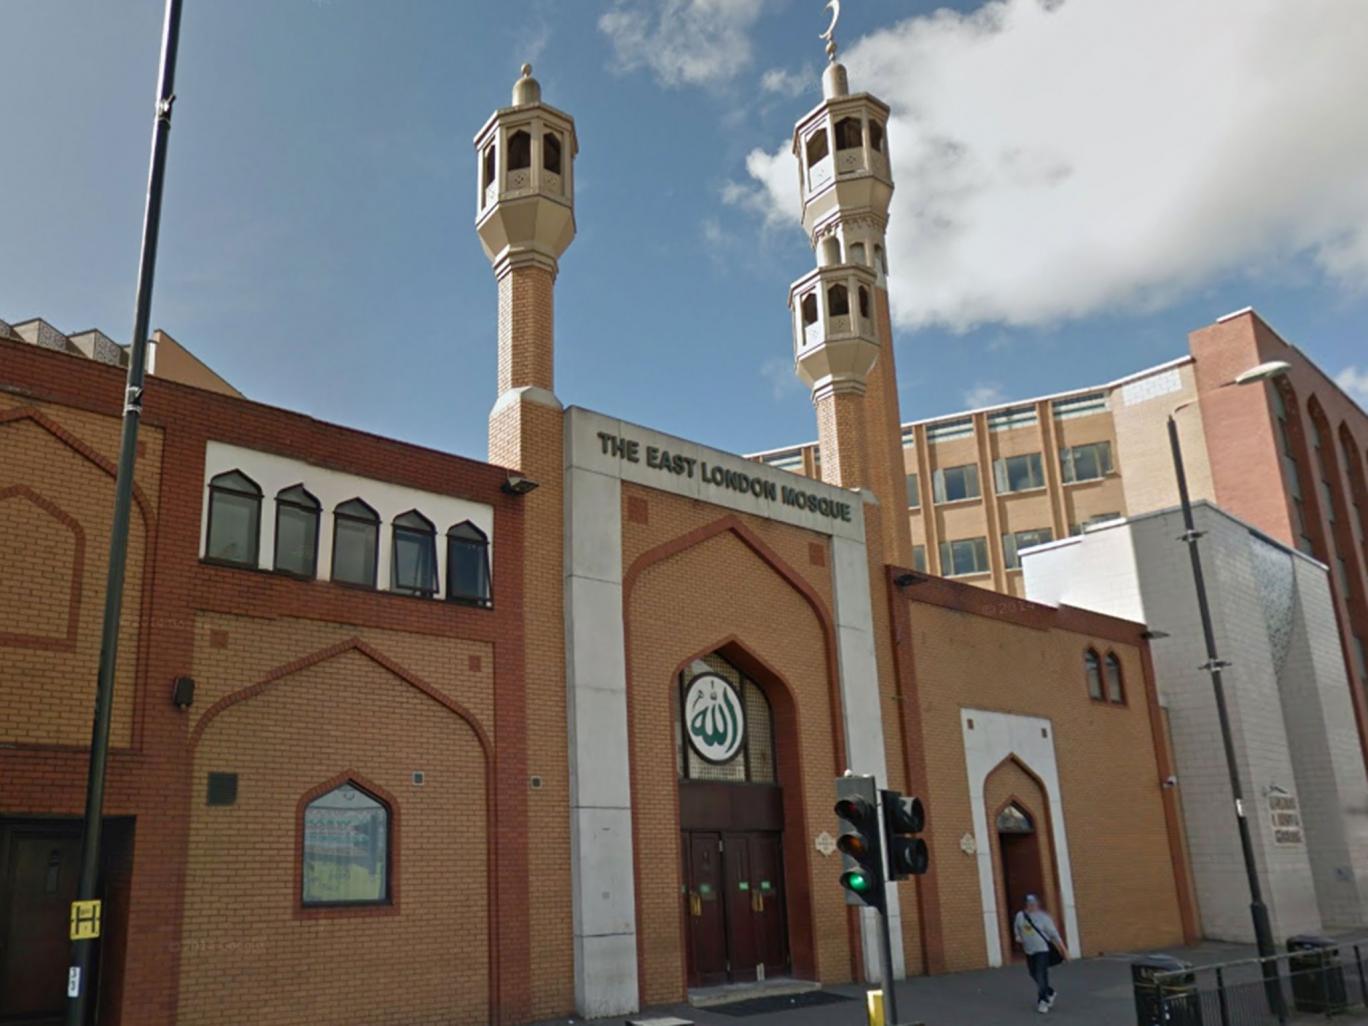 Thousands of Muslims donate 10 tonnes of food to help homeless Londoners at Christmas Eastlondonmosque2